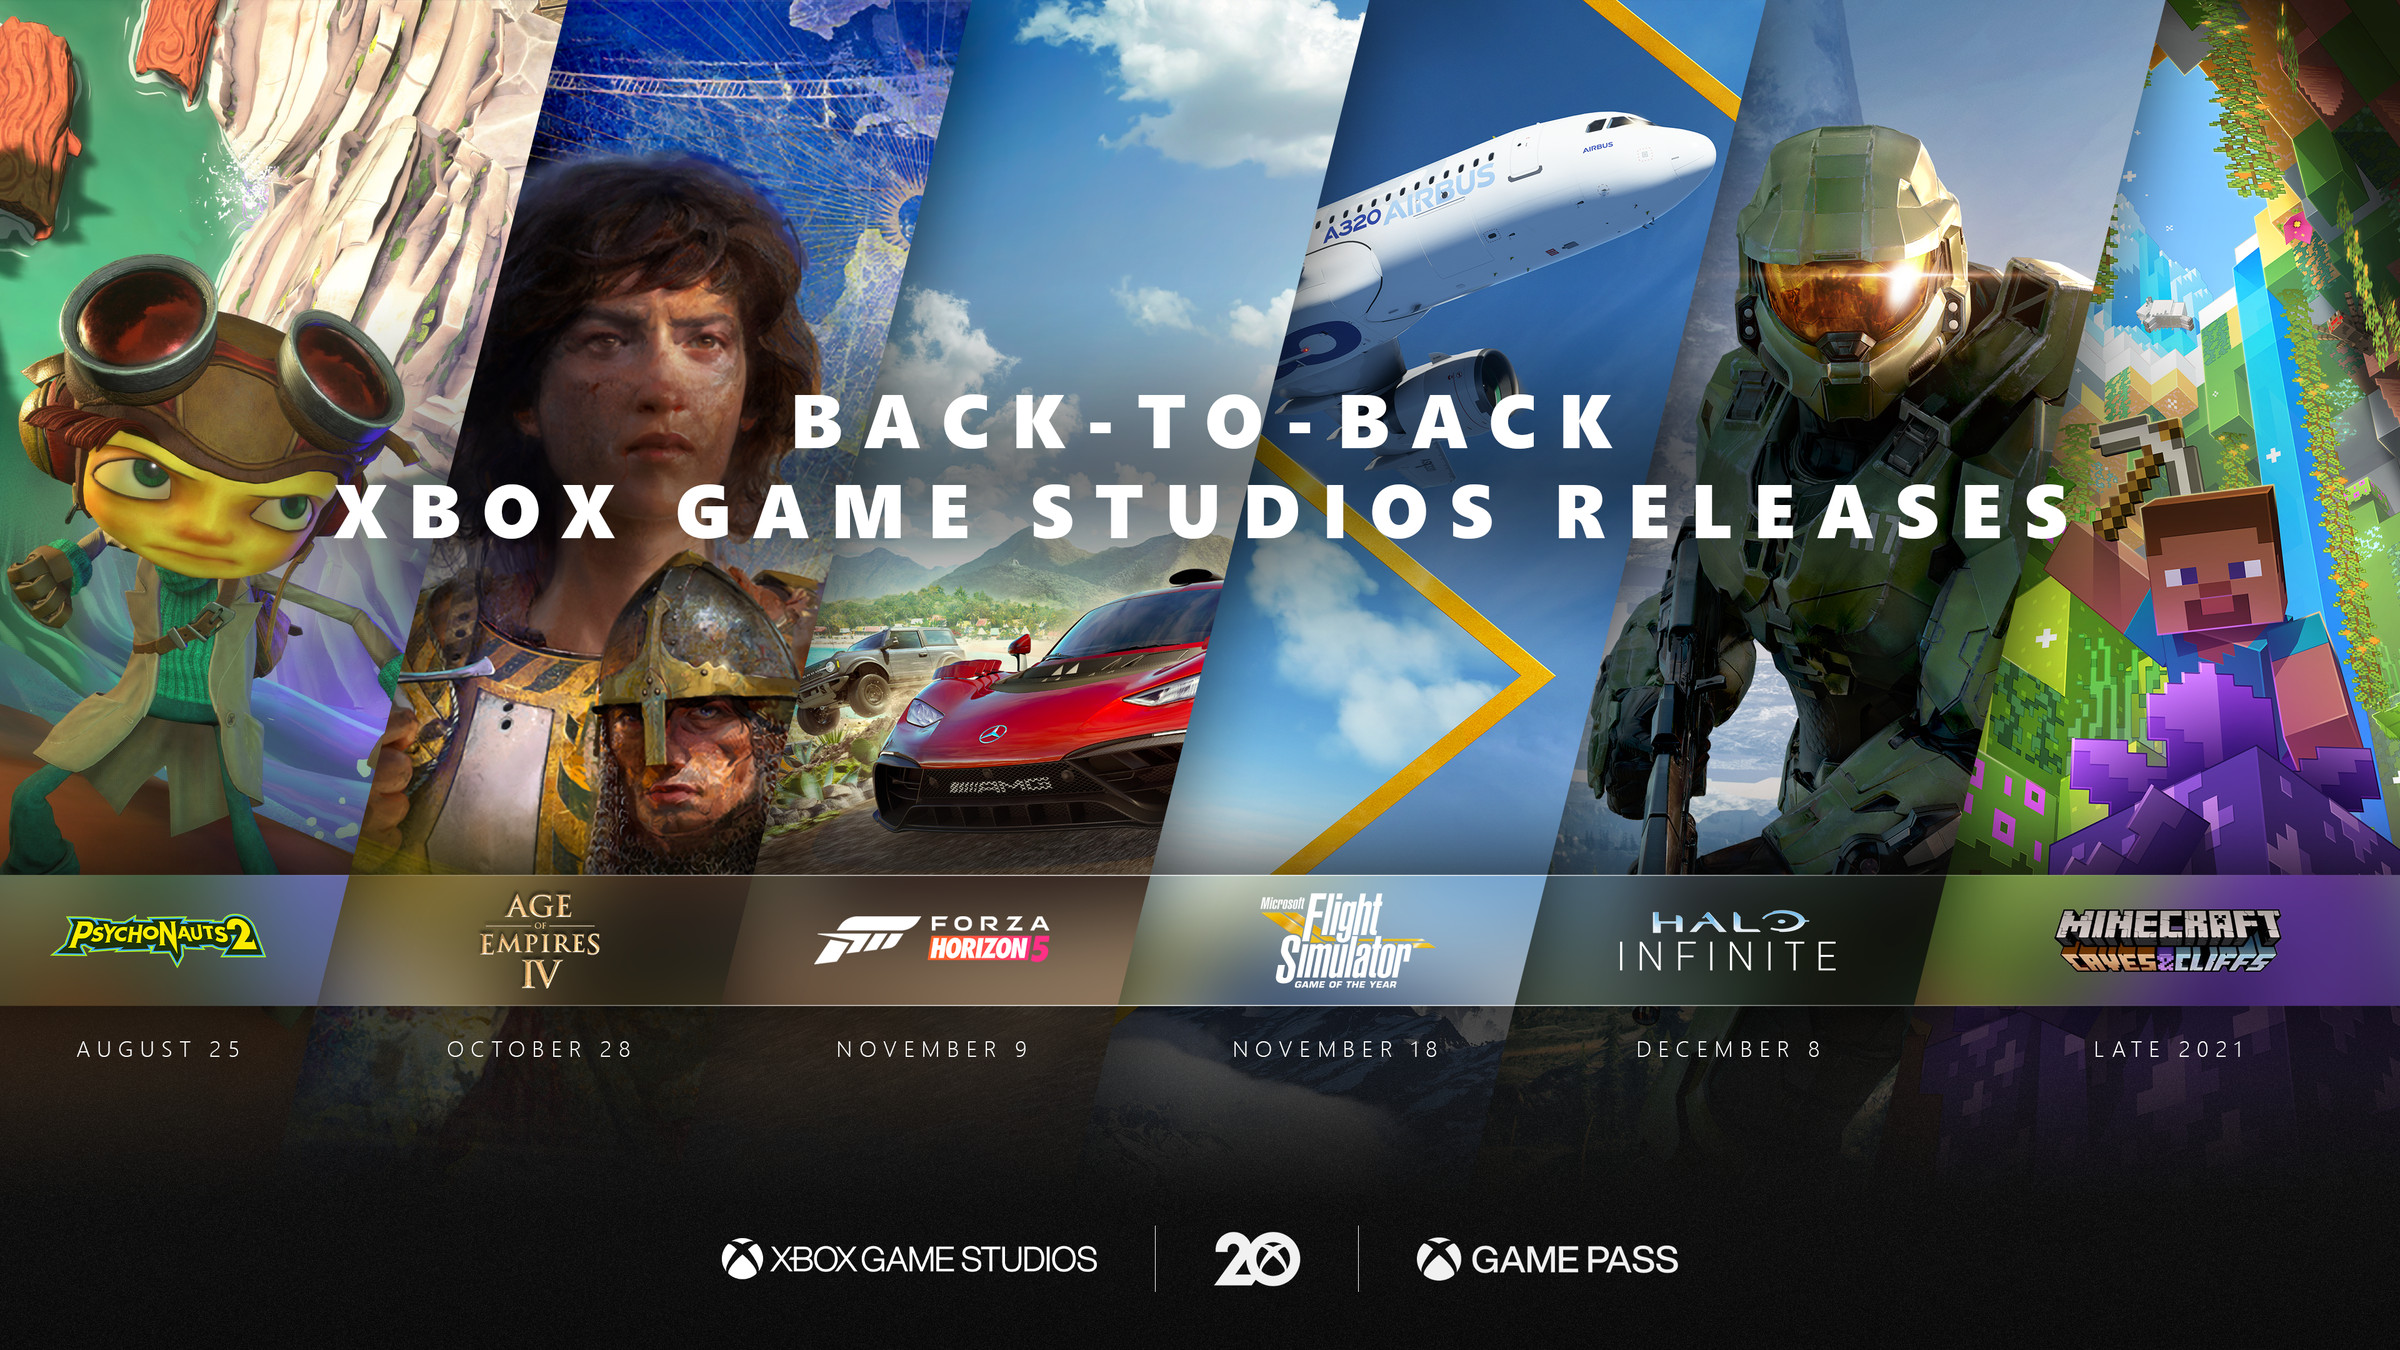 It’s a busy period for Xbox Game Studios.